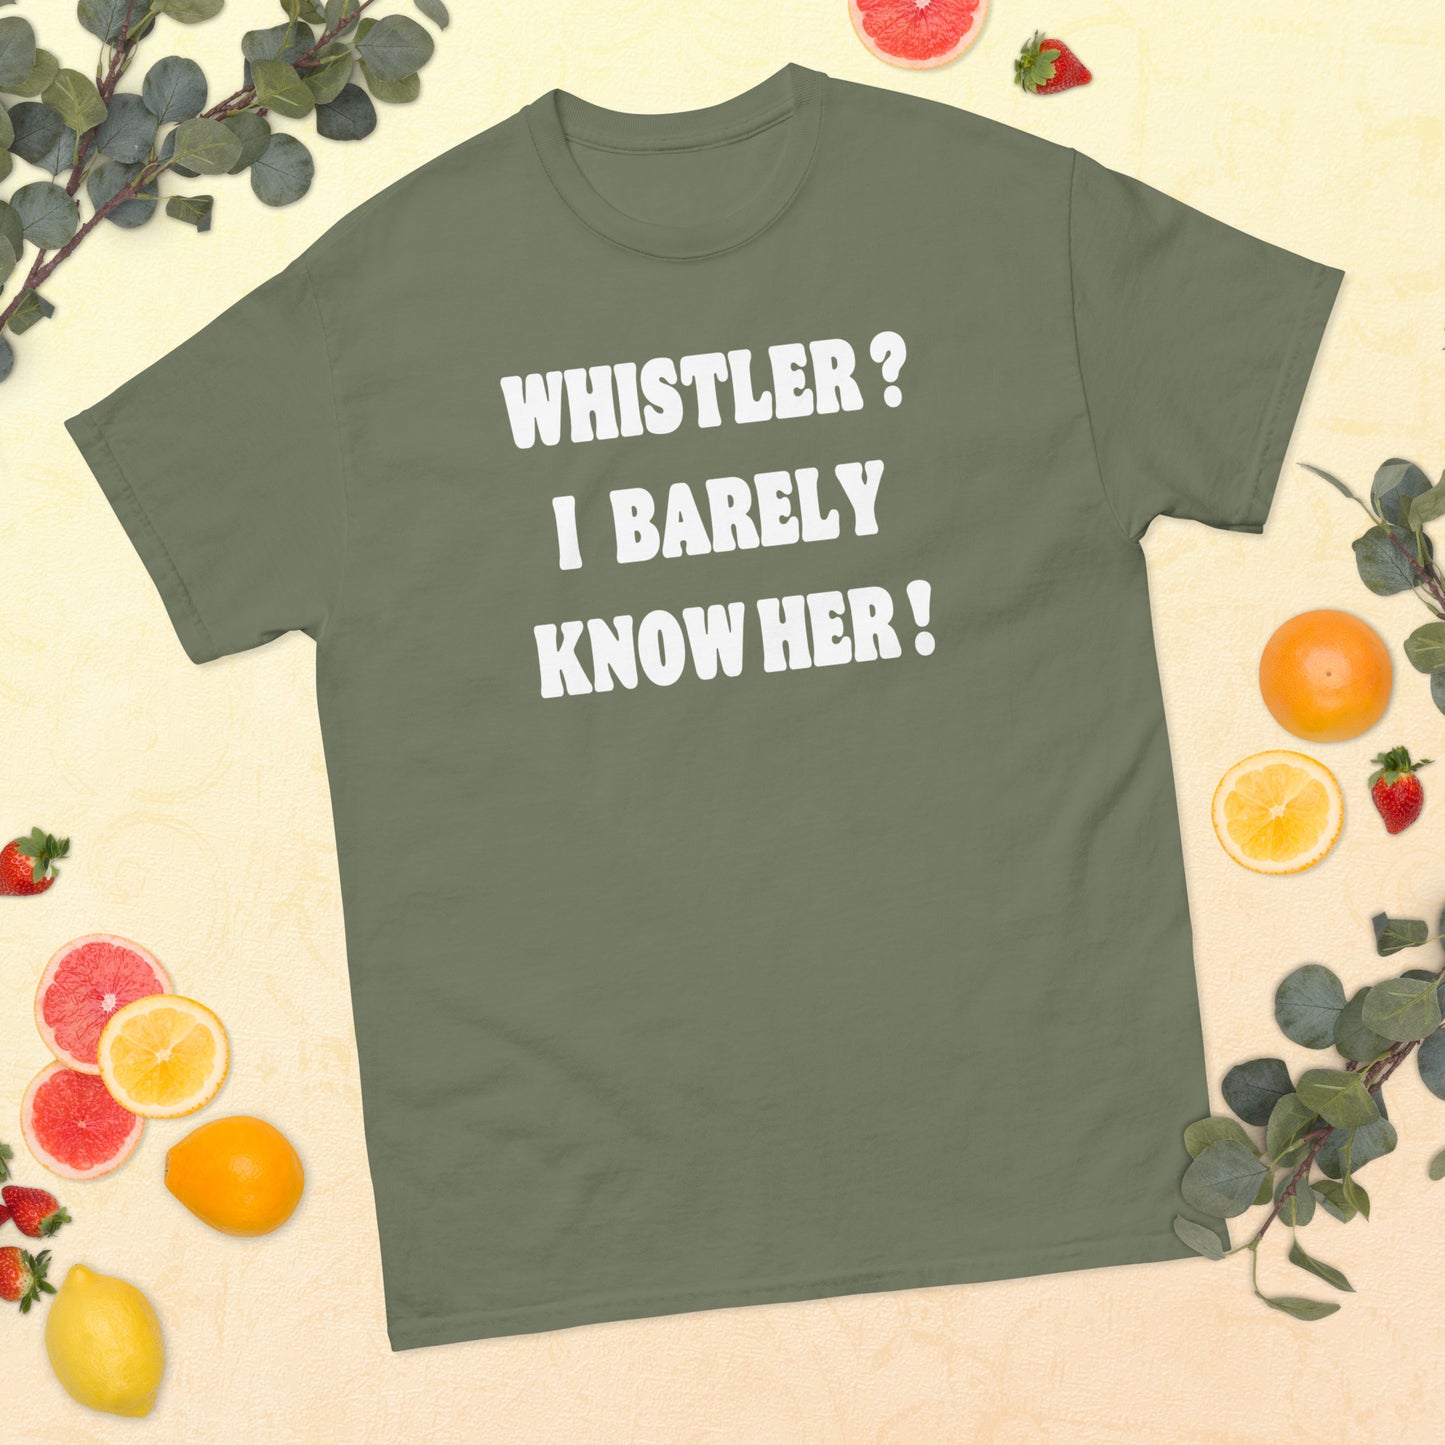 Whistler! I barely know her! Printed t-shirt by Whistler Shirts